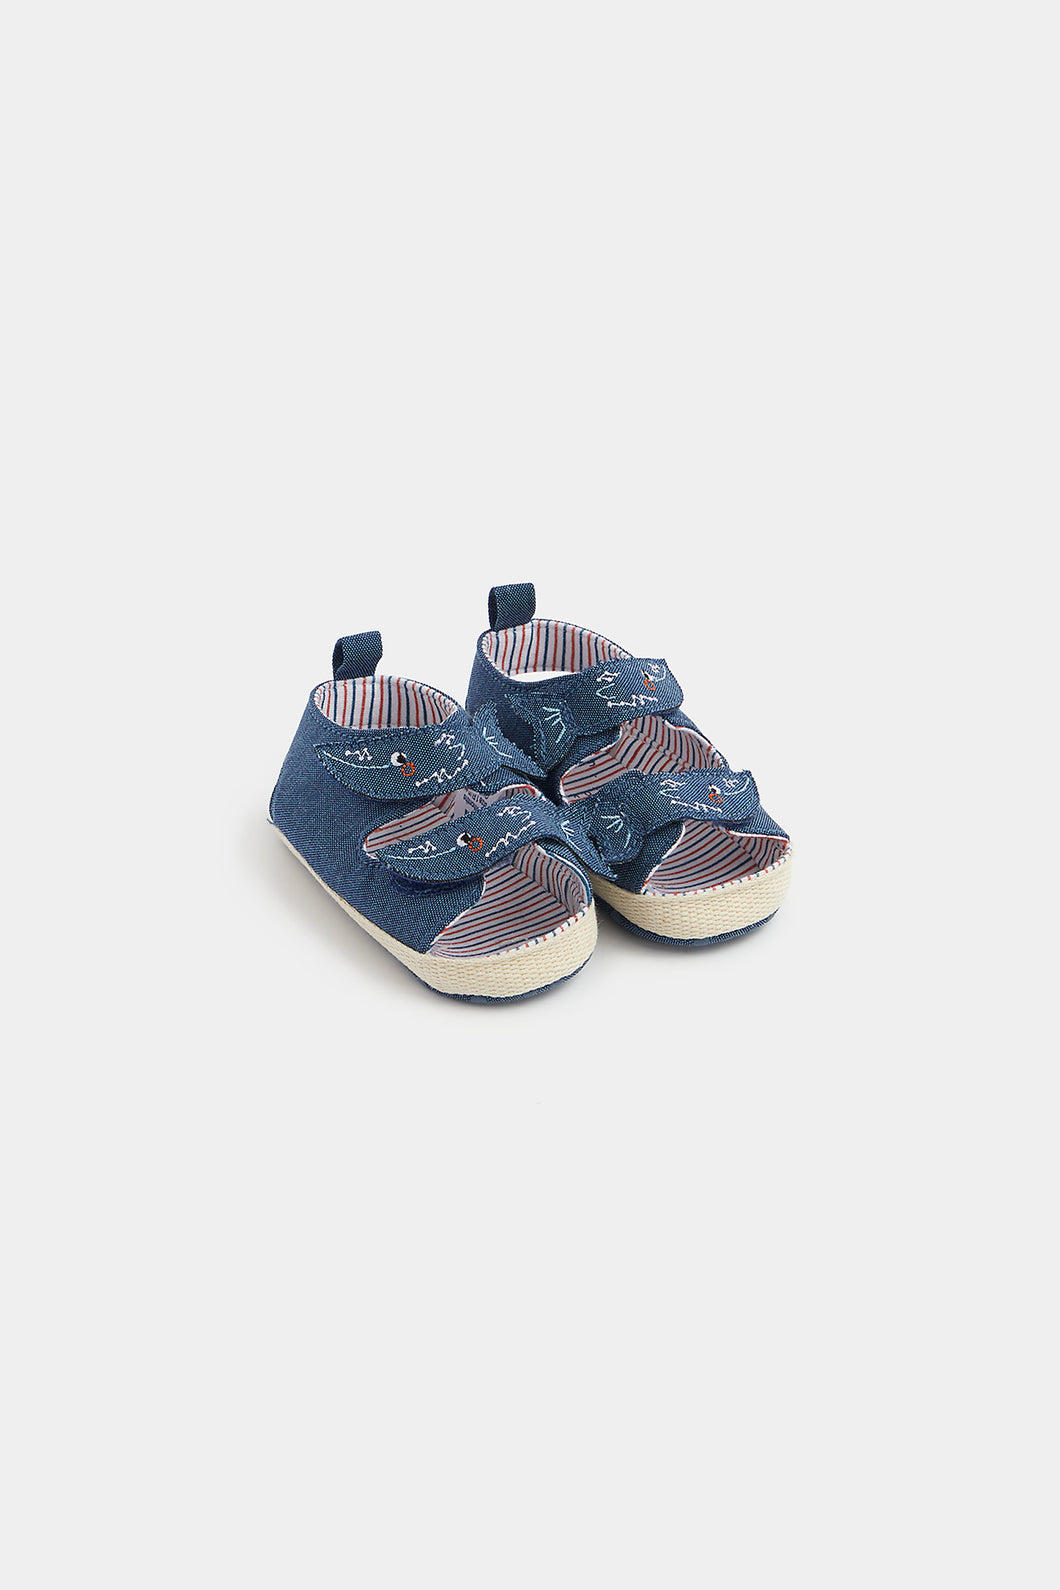 Mothercare Whale Pram Sandals